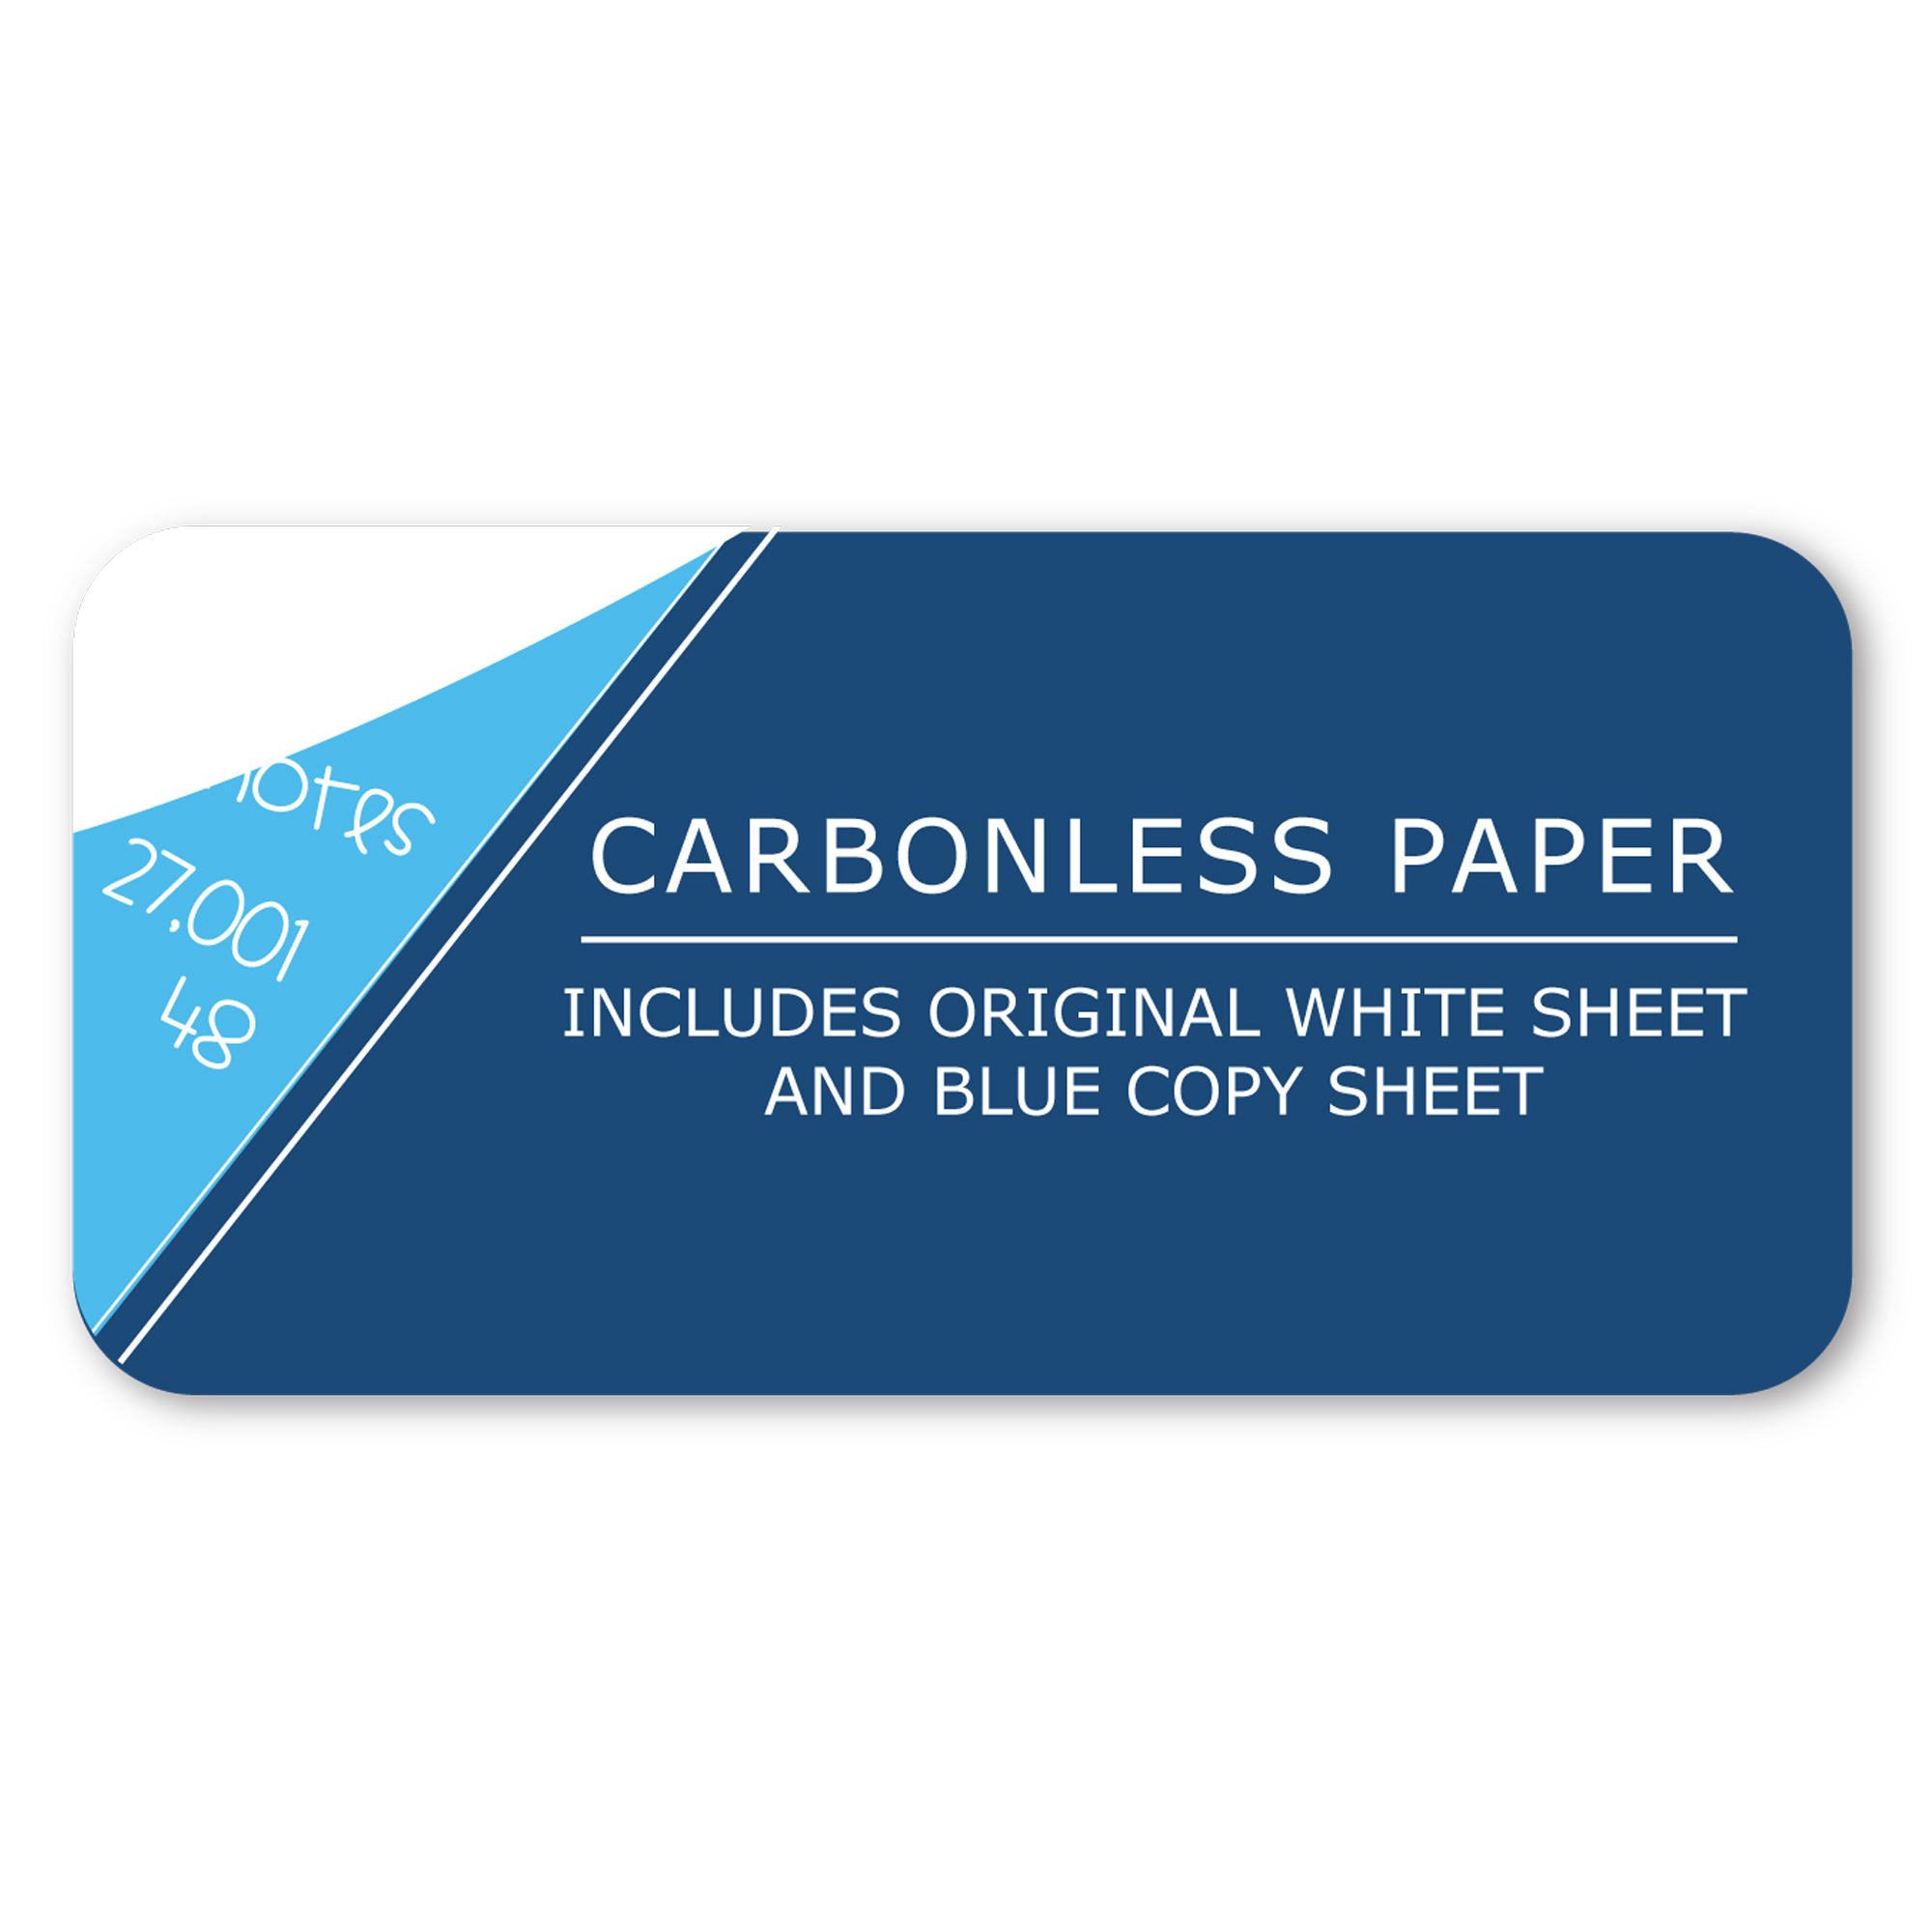 Lab Notebook Carbonless 4x4 Graph Ruled 50 Numbered Sets 9.25 IN x 11 IN  Hard Board Covers 15# White/Blue Paper